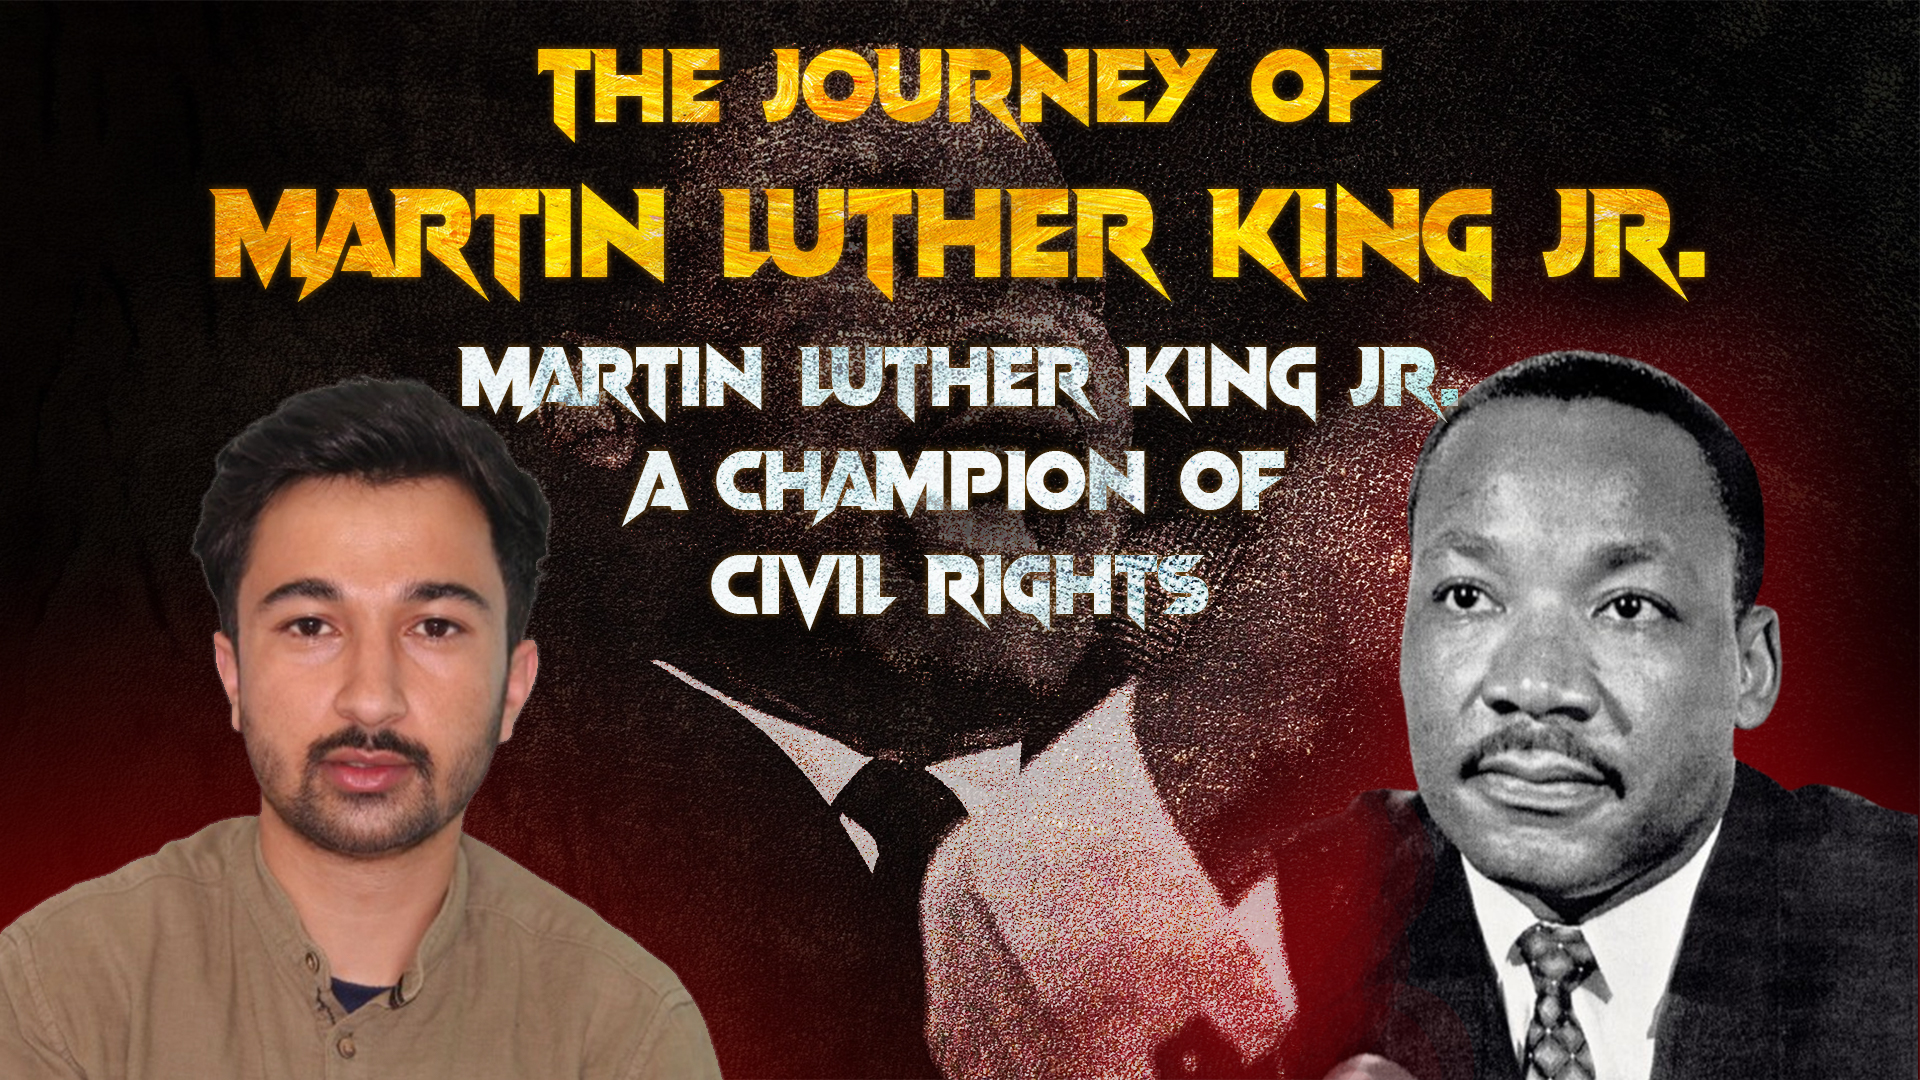 he Journey of Martin Luther King Jr.